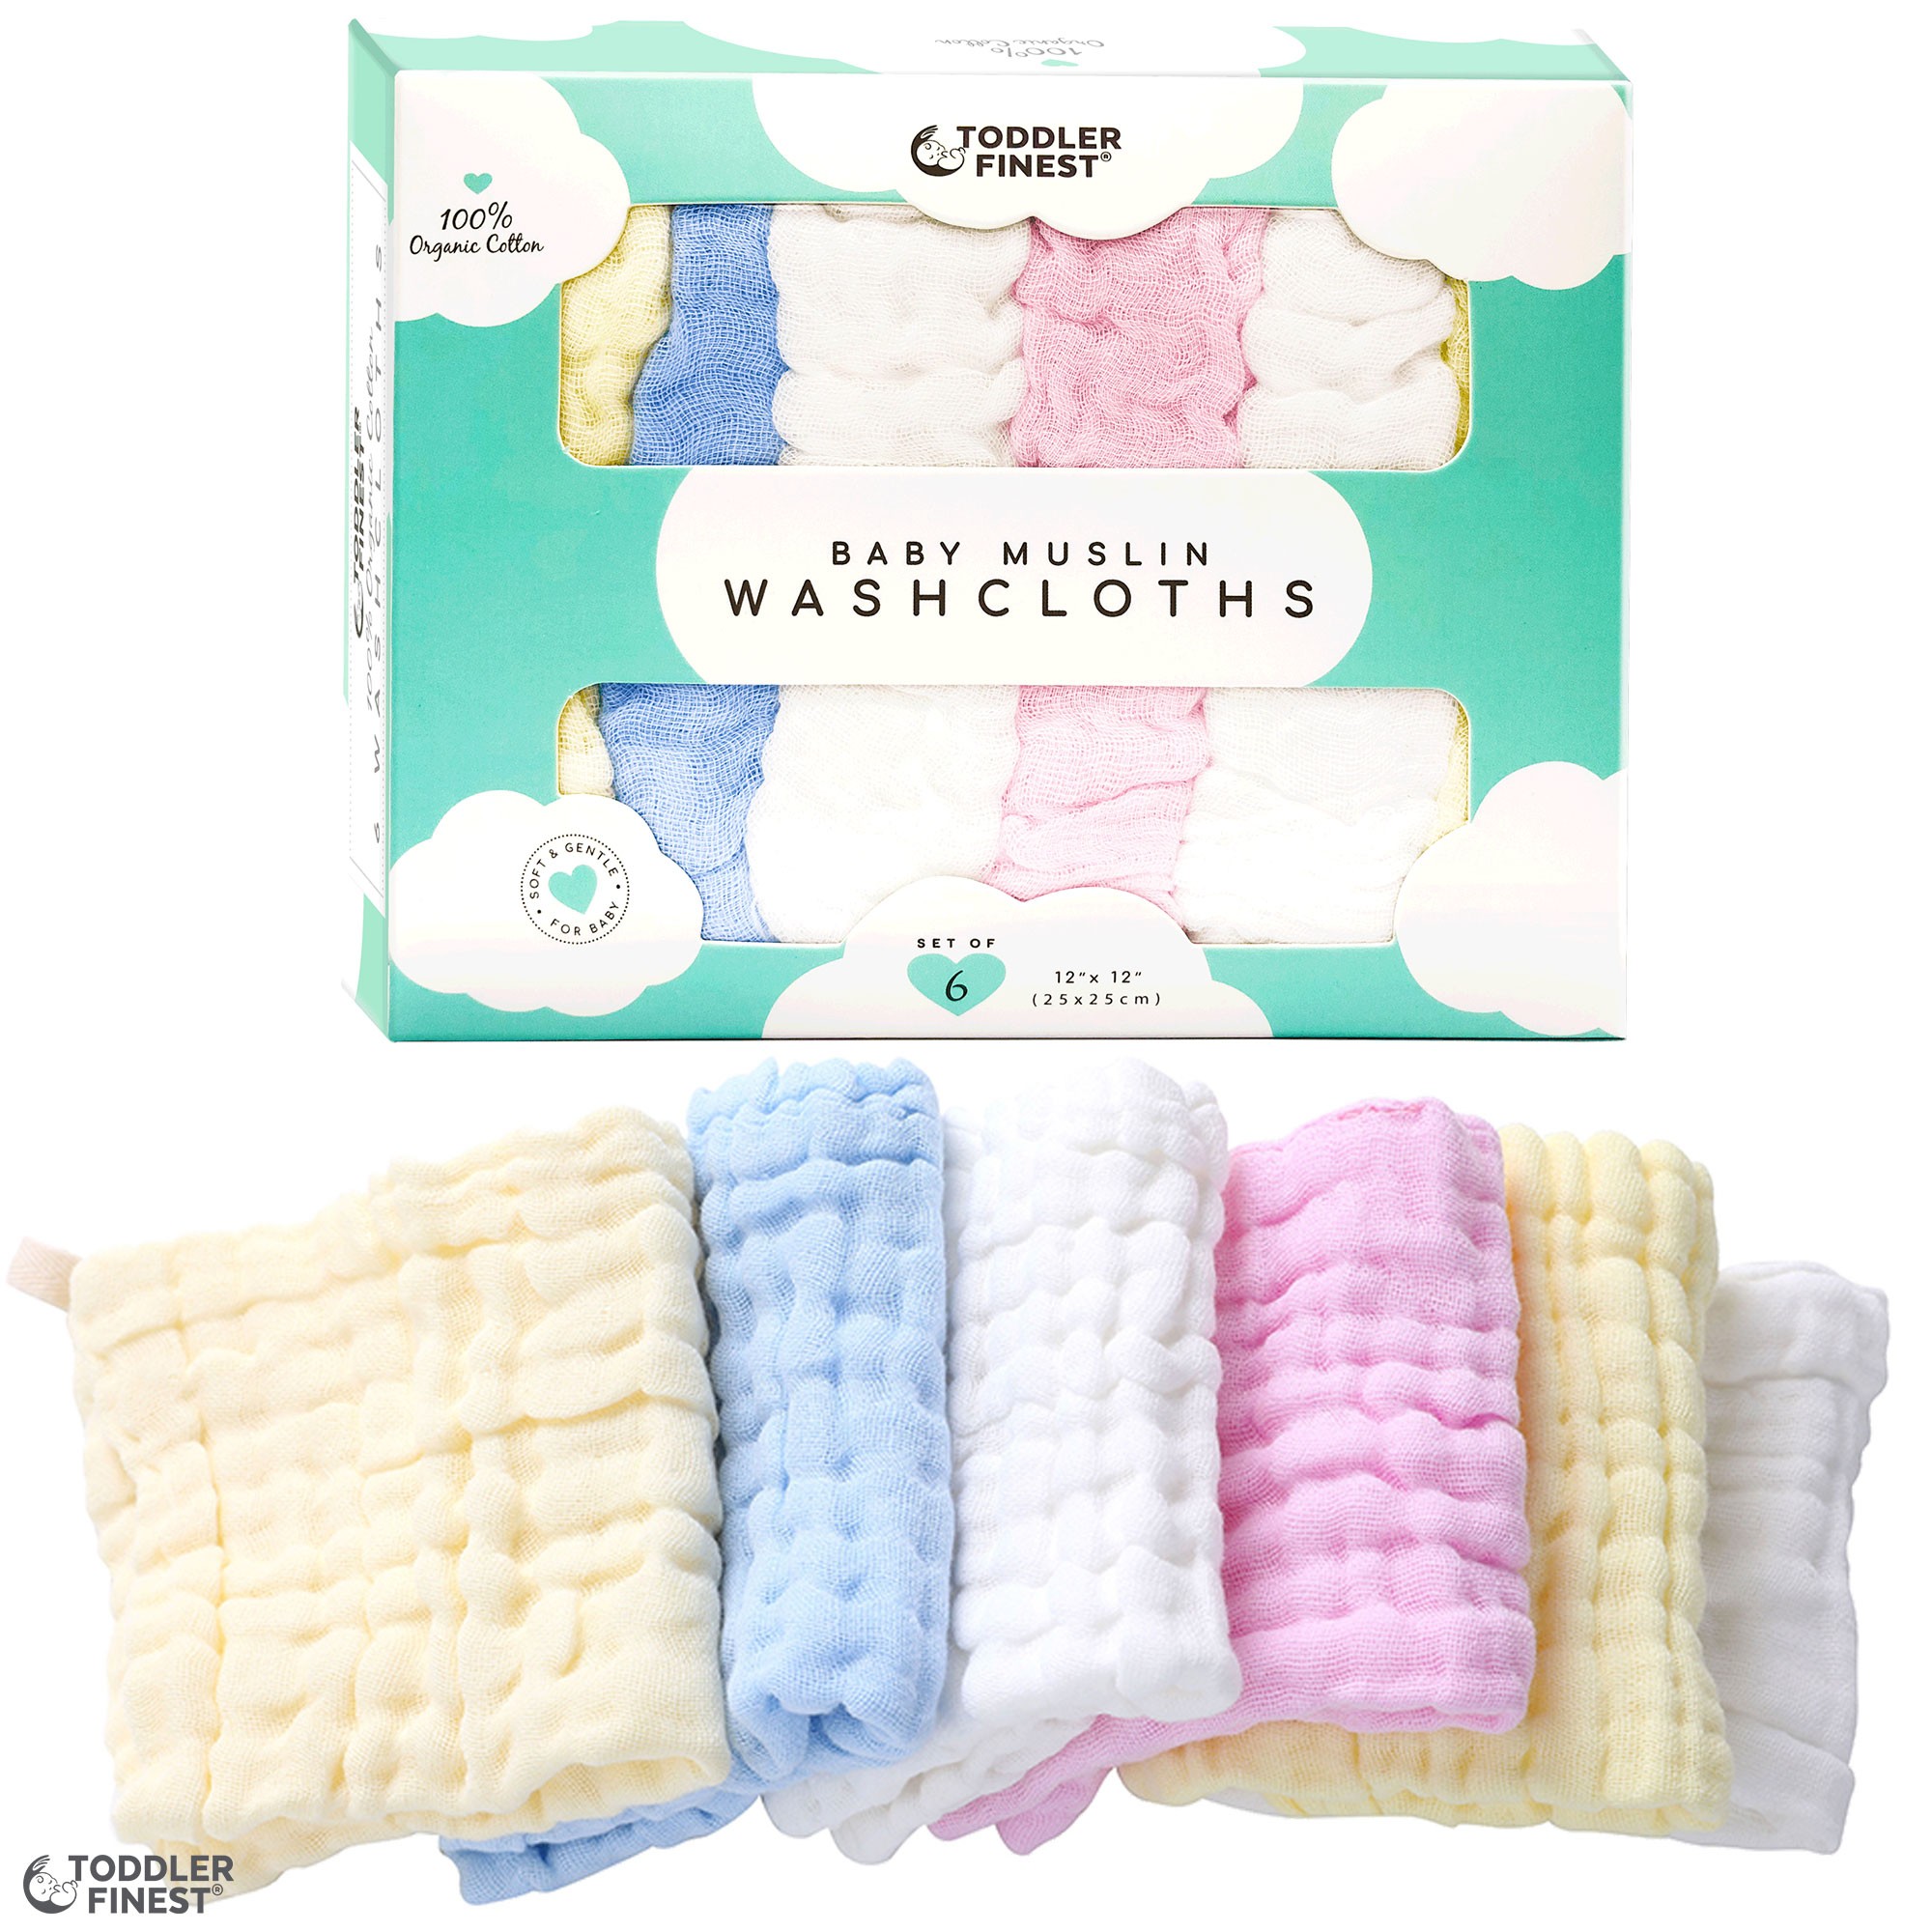 ViVidLife Baby Muslin Washcloths 10 PCS Baby Muslin Towels Wipes Cotton Squares Soft Reusable Baby Face Shower Bath Wiping Bathing Feeding Baby Towel for Newborn Baby Shower Gift